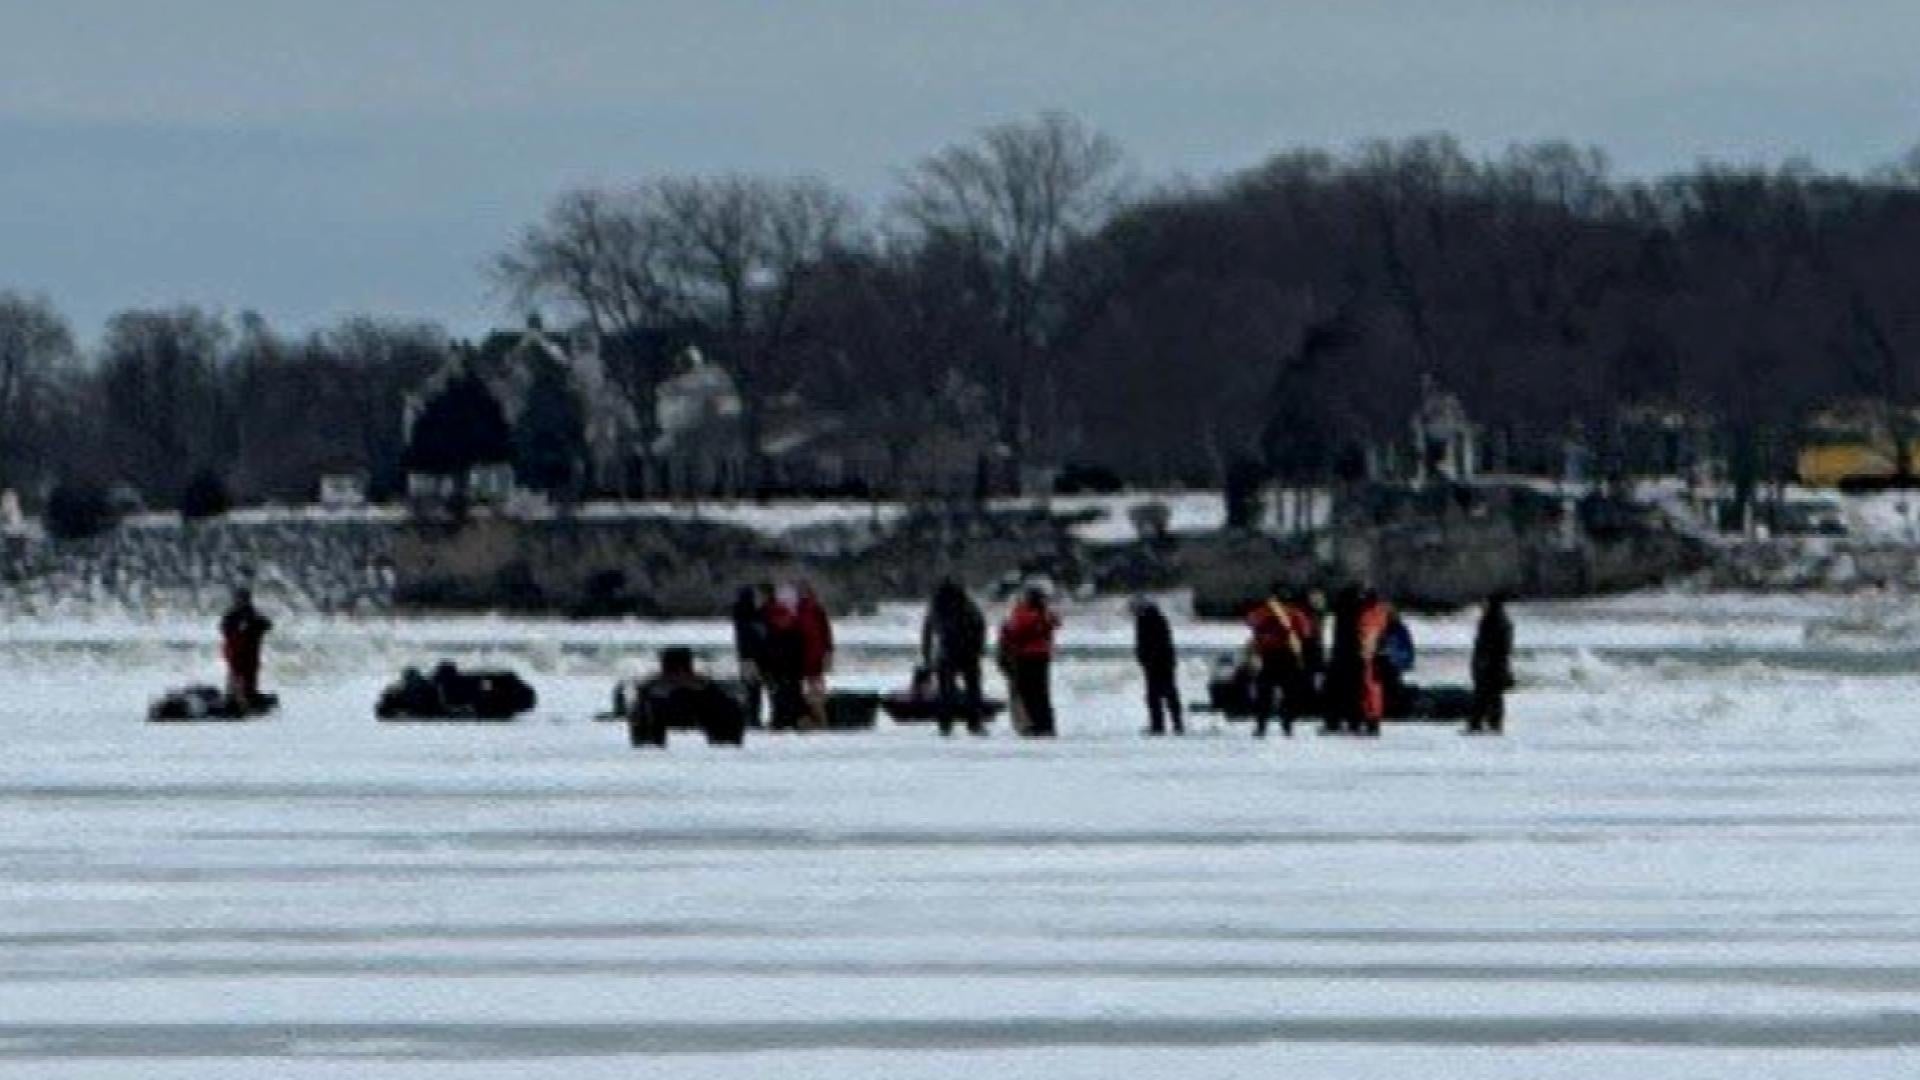 20 people safe after being stranded on Lake Erie ice floe